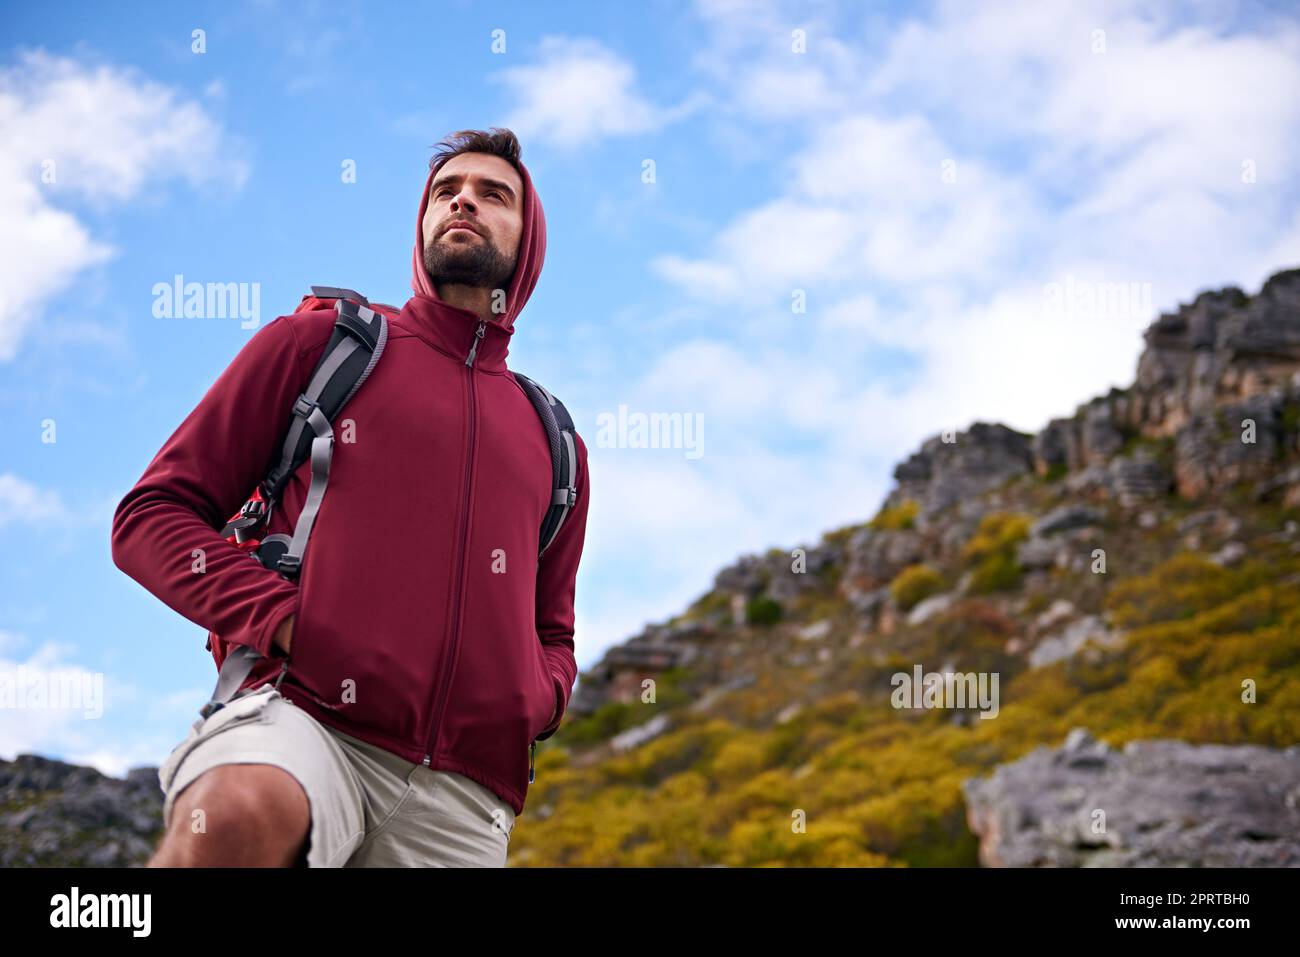 Happy man walking on trail on a hiking trip in the mountains stock photo